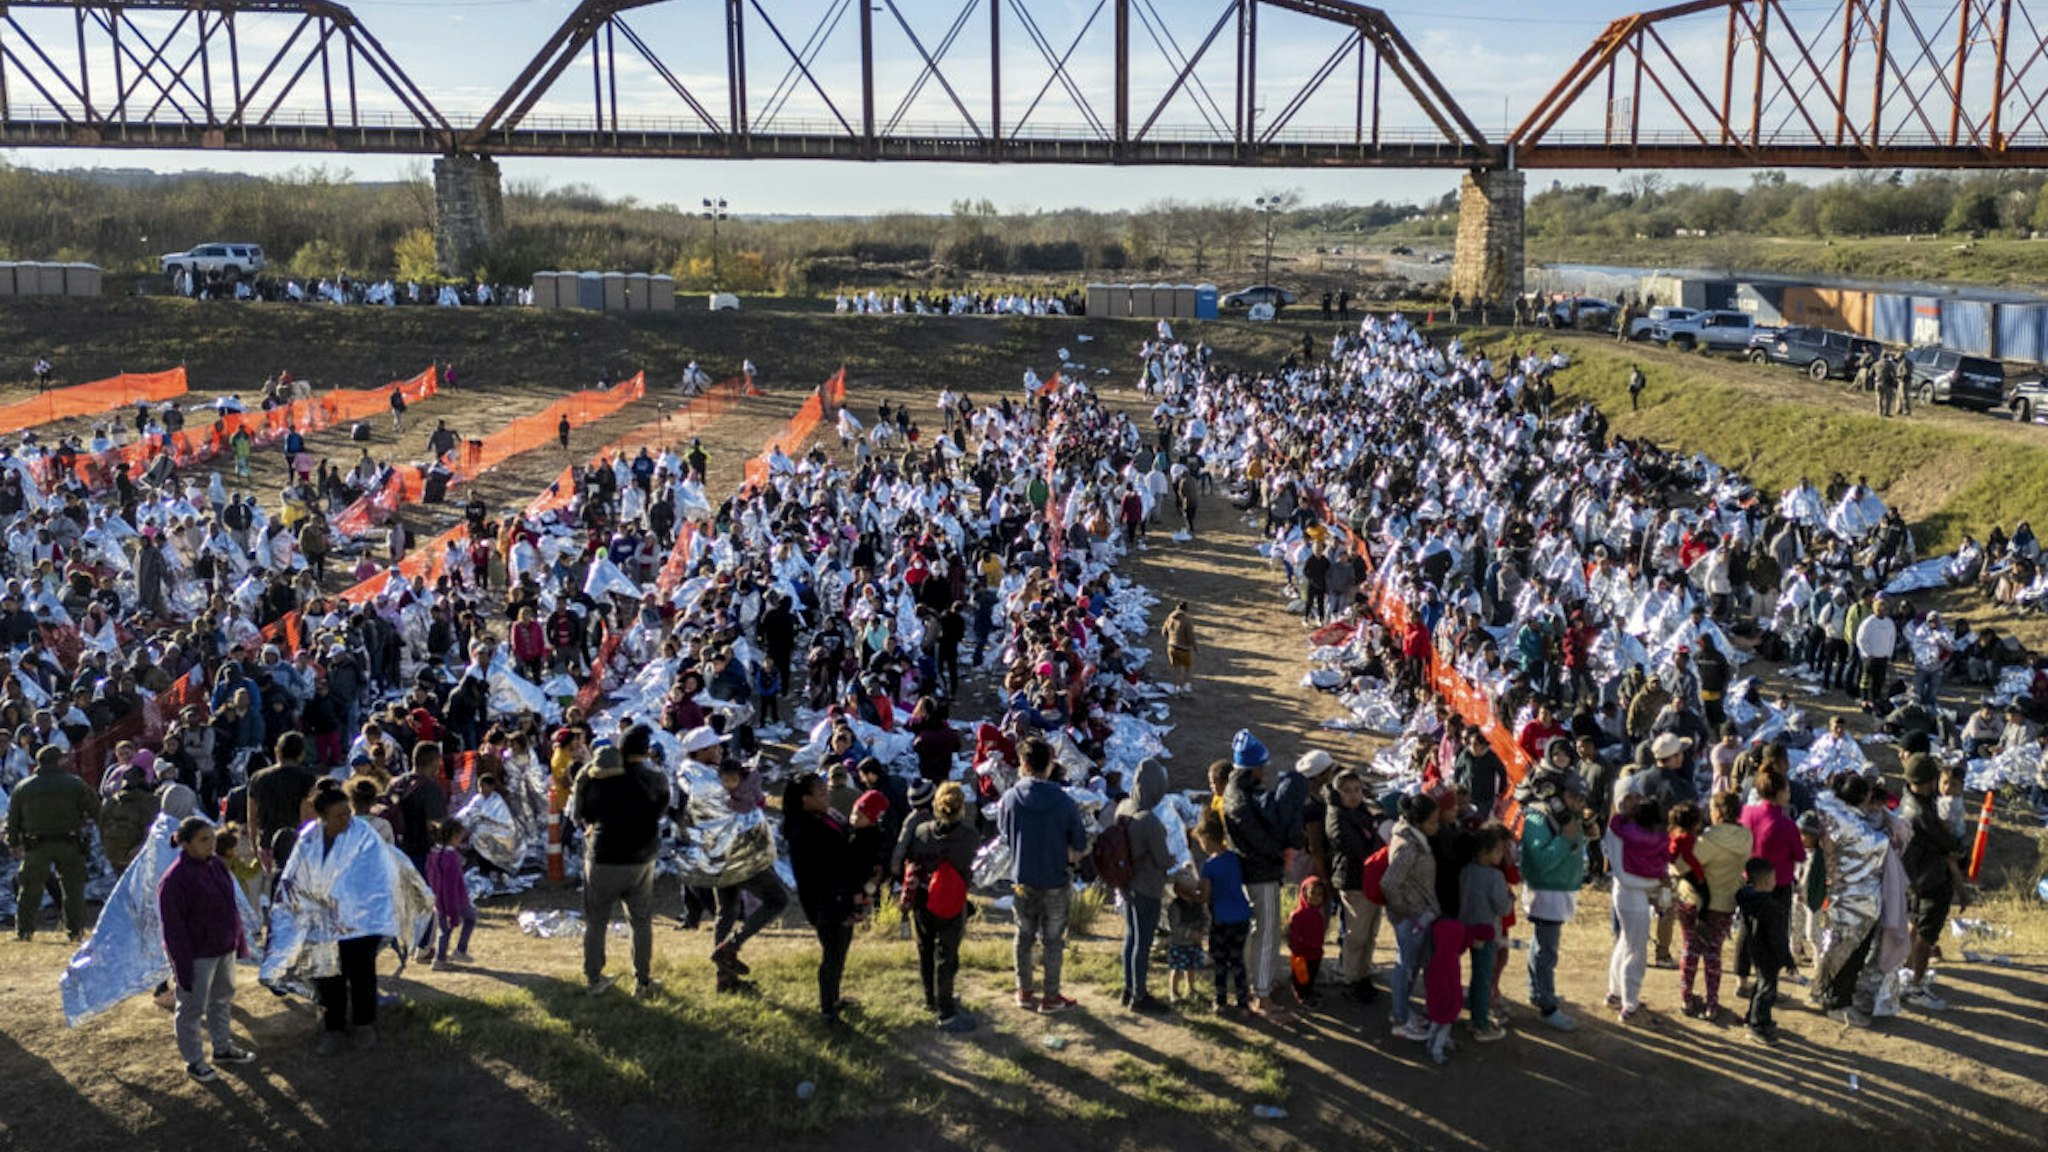 EAGLE PASS, TEXAS - DECEMBER 19: In an aerial view, thousands of immigrants, most wearing thermal blankets, await processing at a U.S. Border Patrol transit center on December 19, 2023 in Eagle Pass, Texas. Major surges of migrants illegally crossing the Rio Grande have overwhelmed U.S. border authorities in recent weeks.